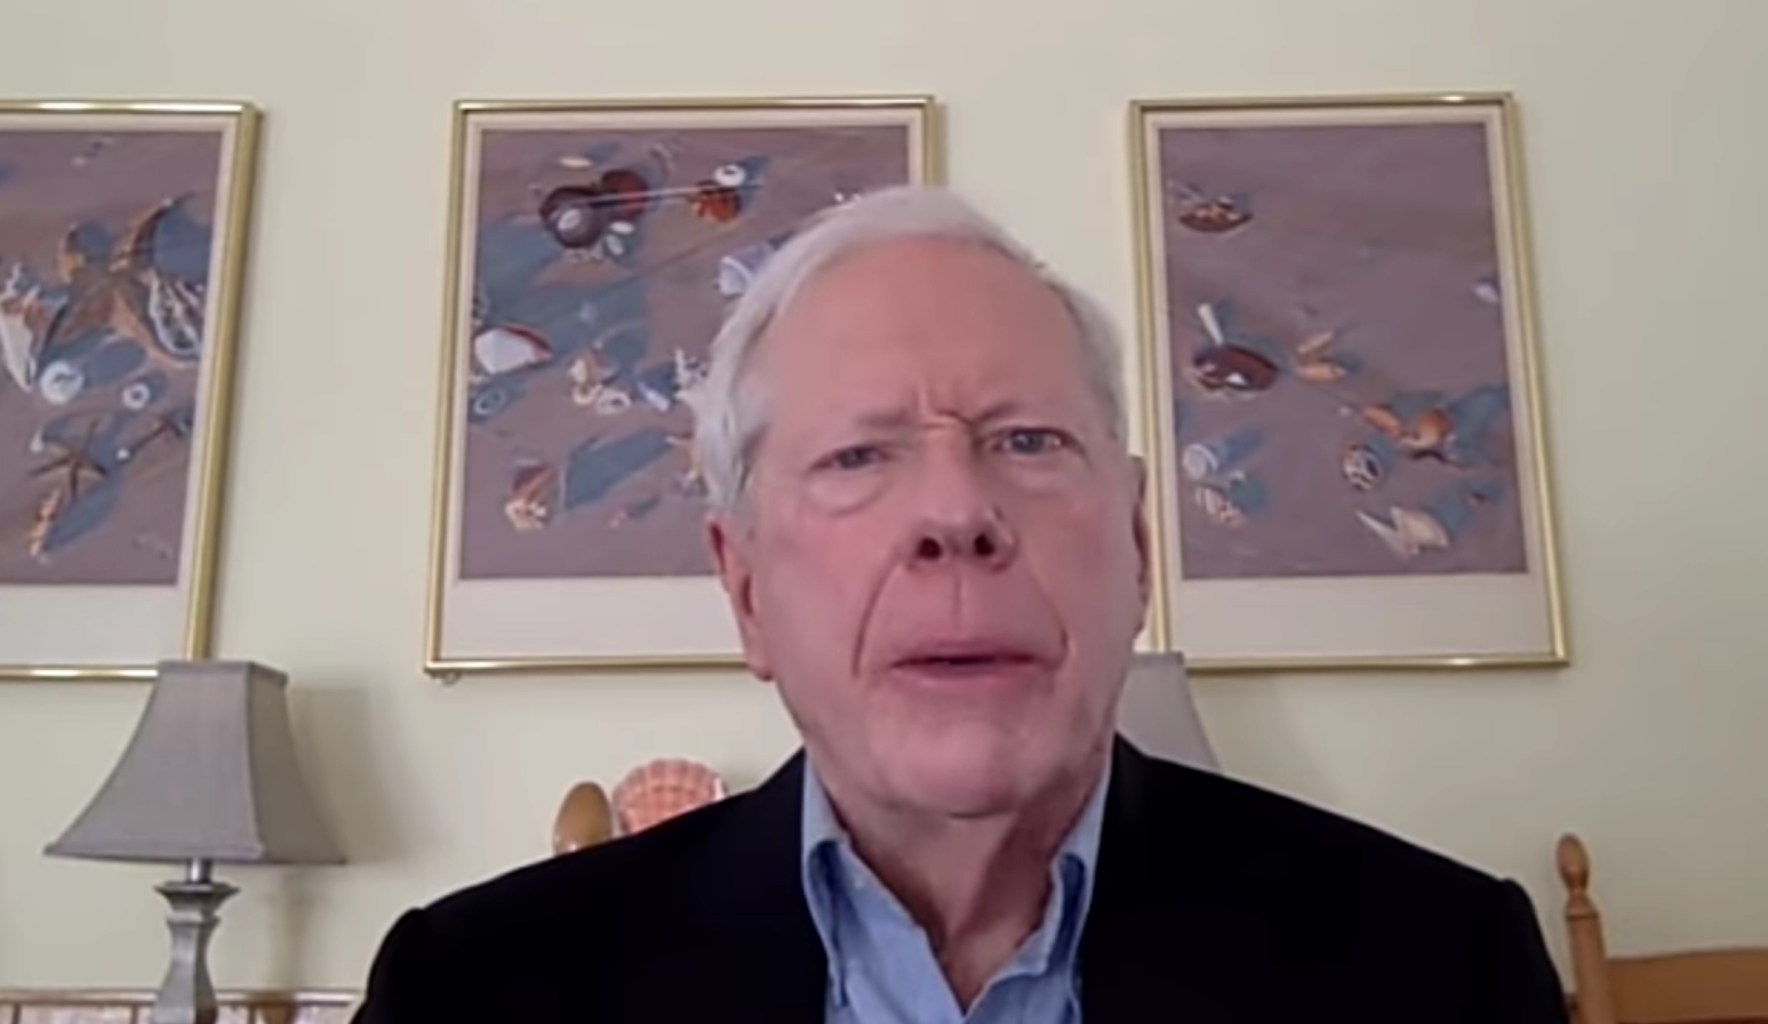 America’s Collapse: Paul Craig Roberts Exposes An Economy Based On Plunder